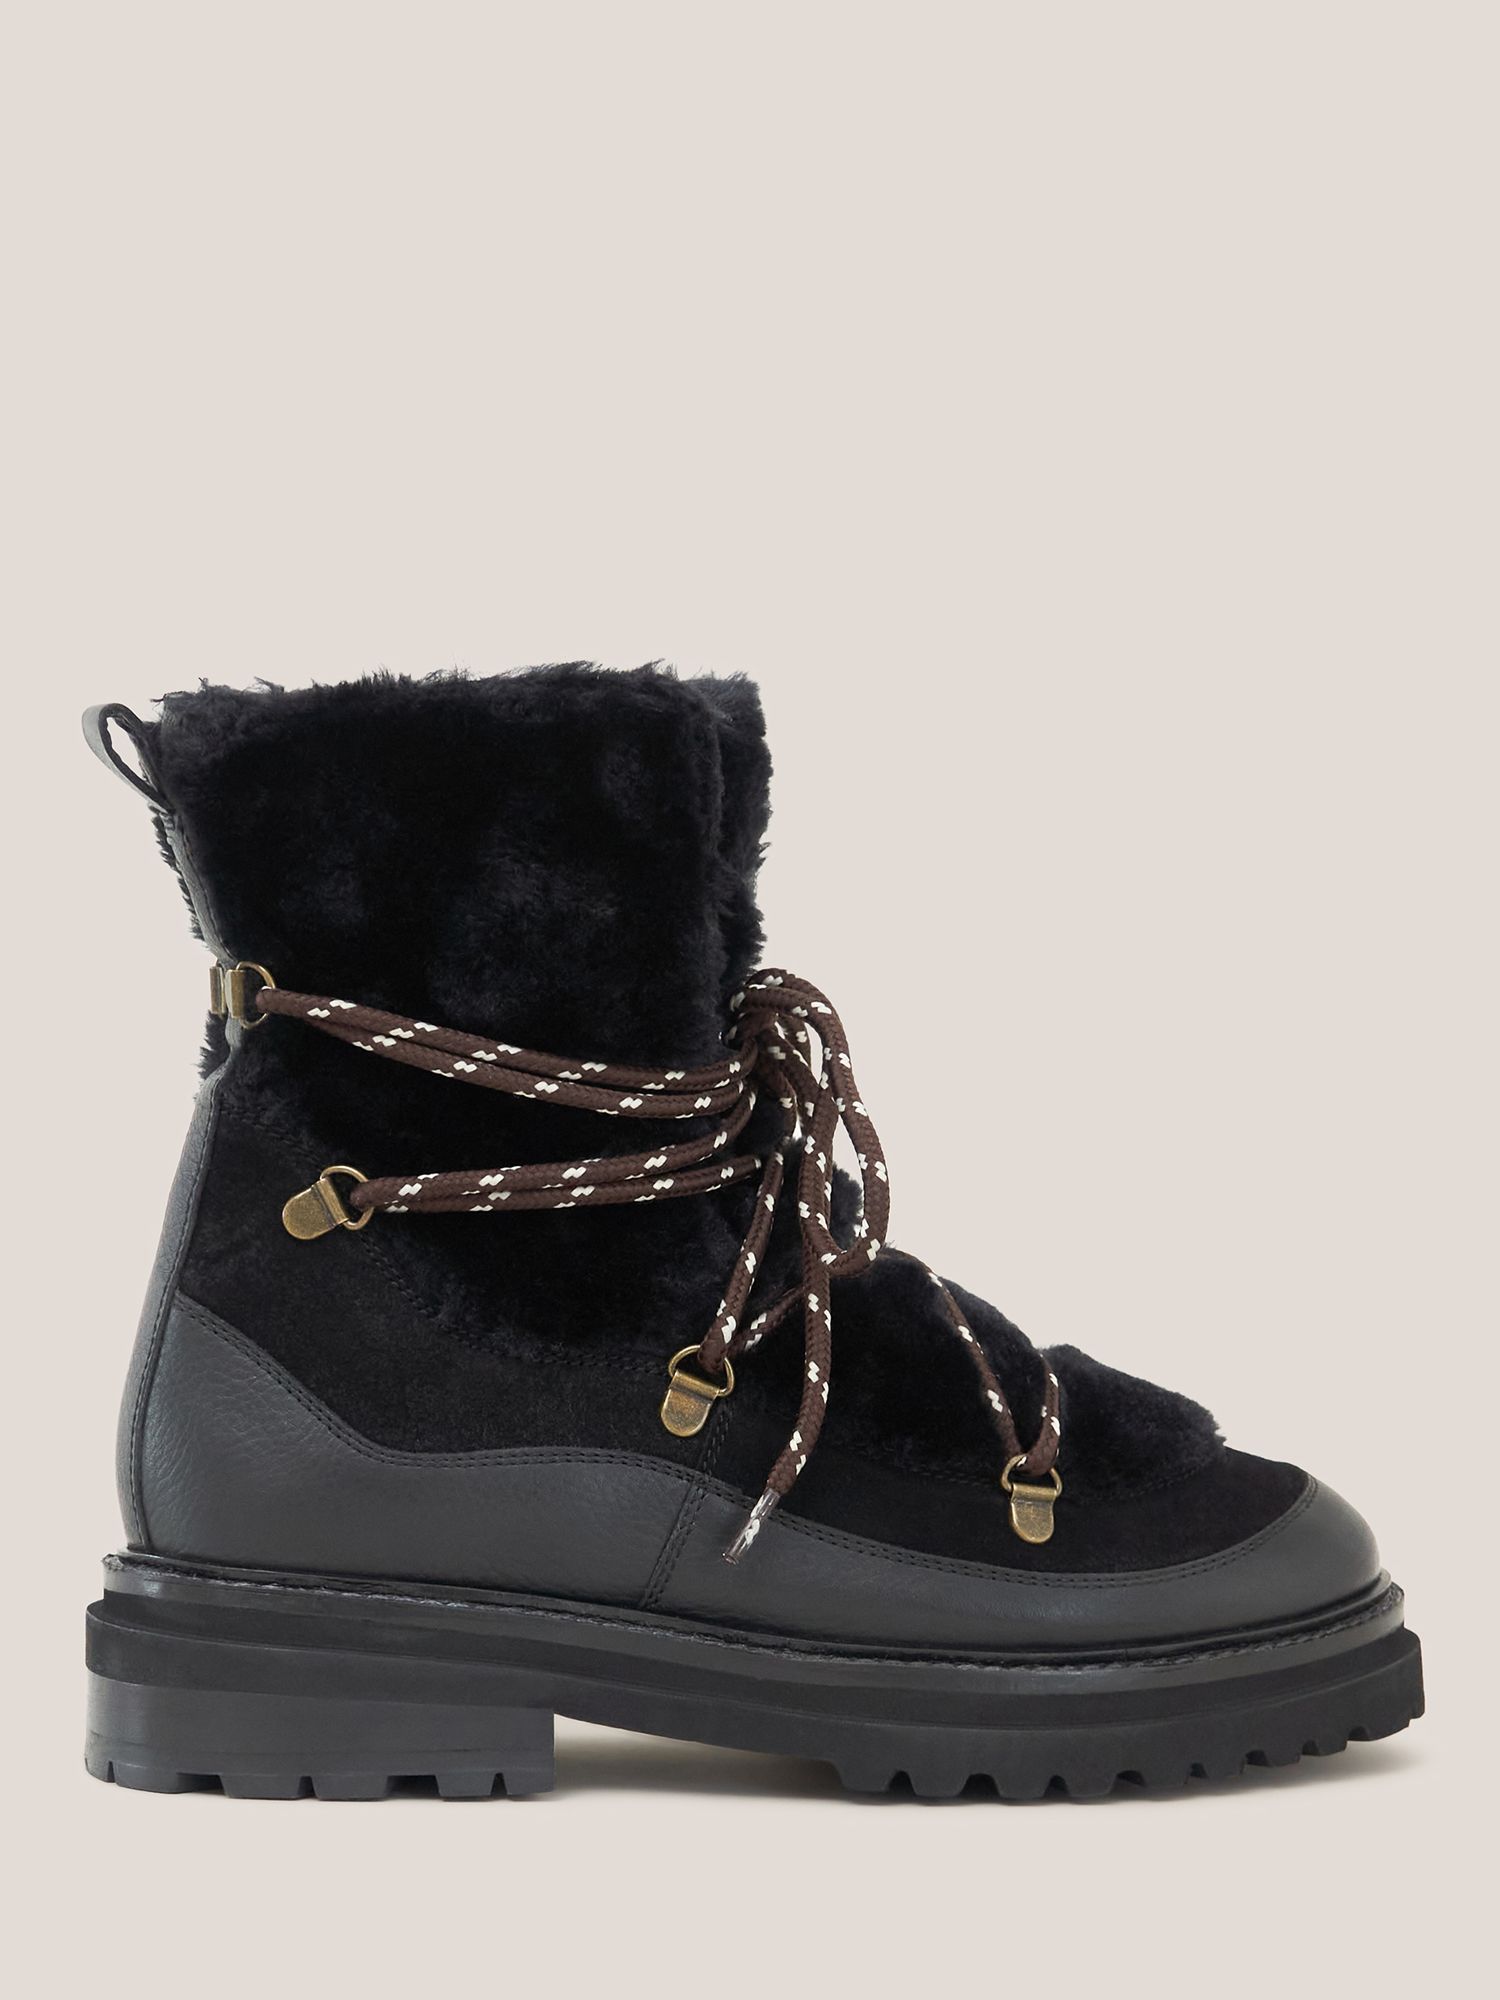 White Stuff Hailey Lace Up Hiker Boots